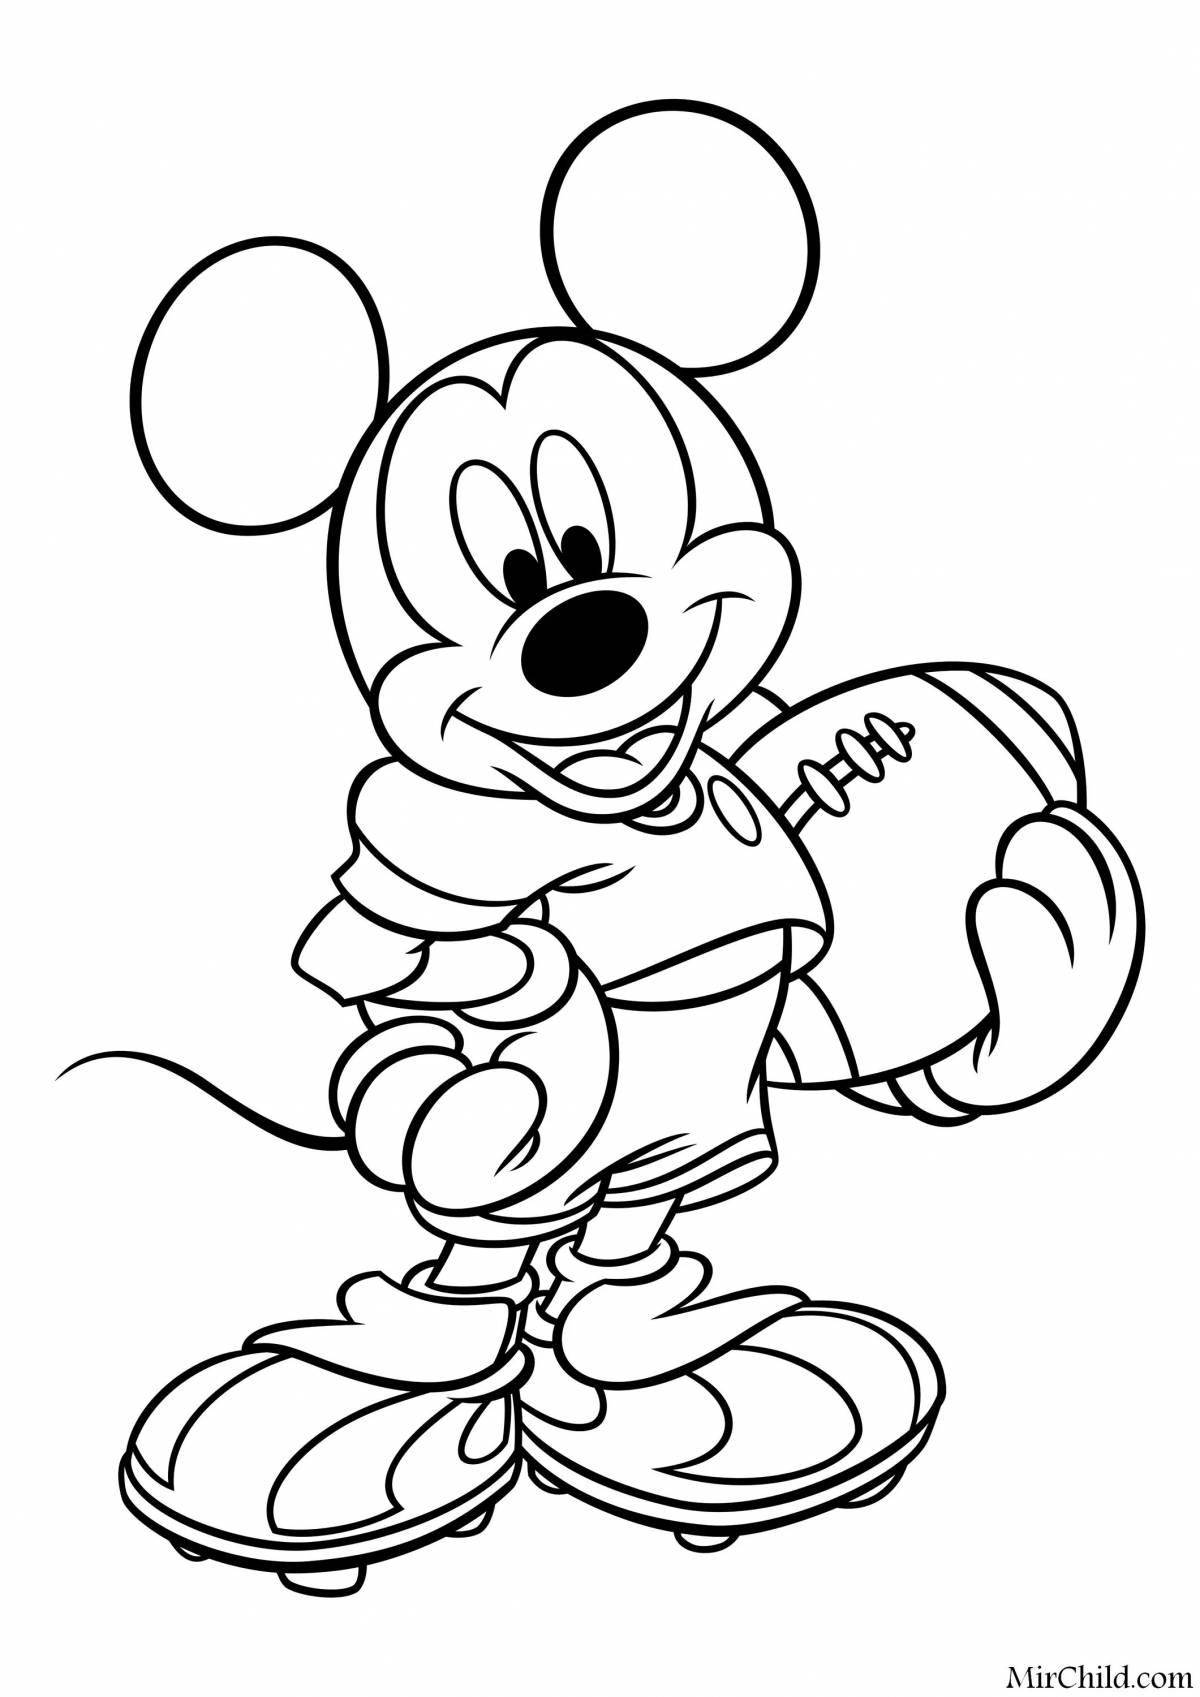 Mickey Smart Coloring